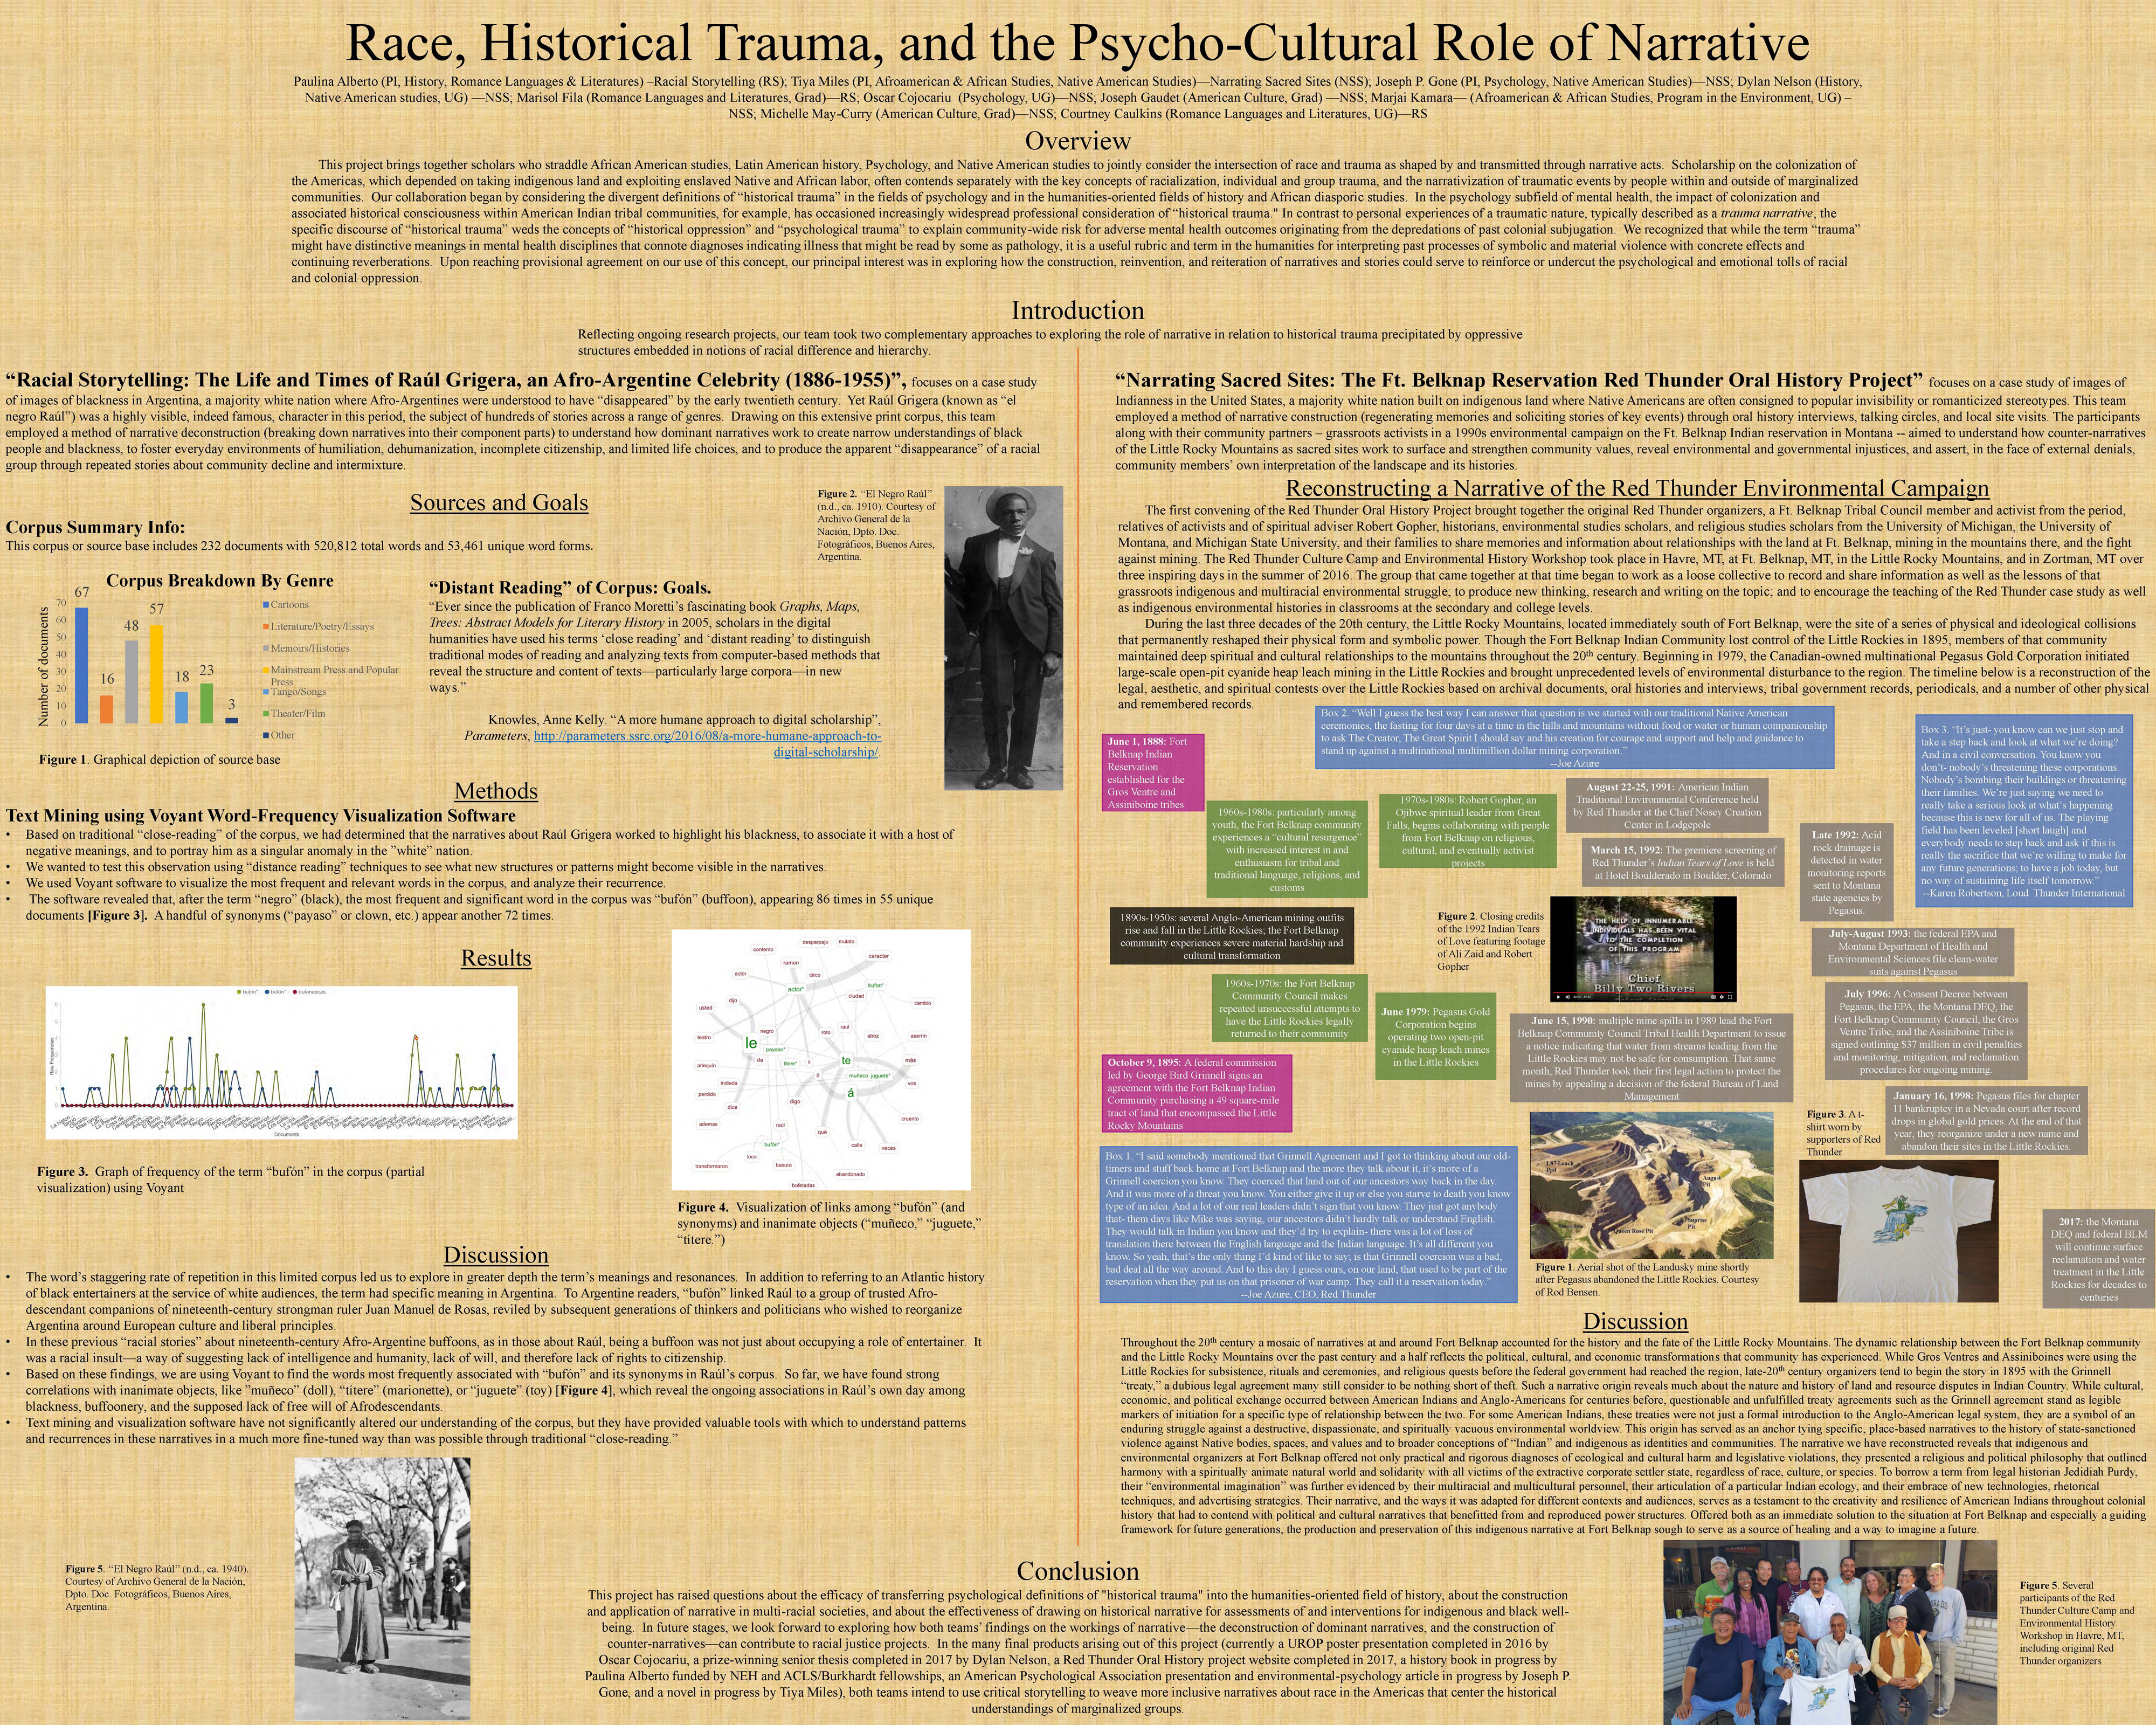 poster that outlines Race, Historical Trauma, and the Psycho-Cultural Role of Narrative